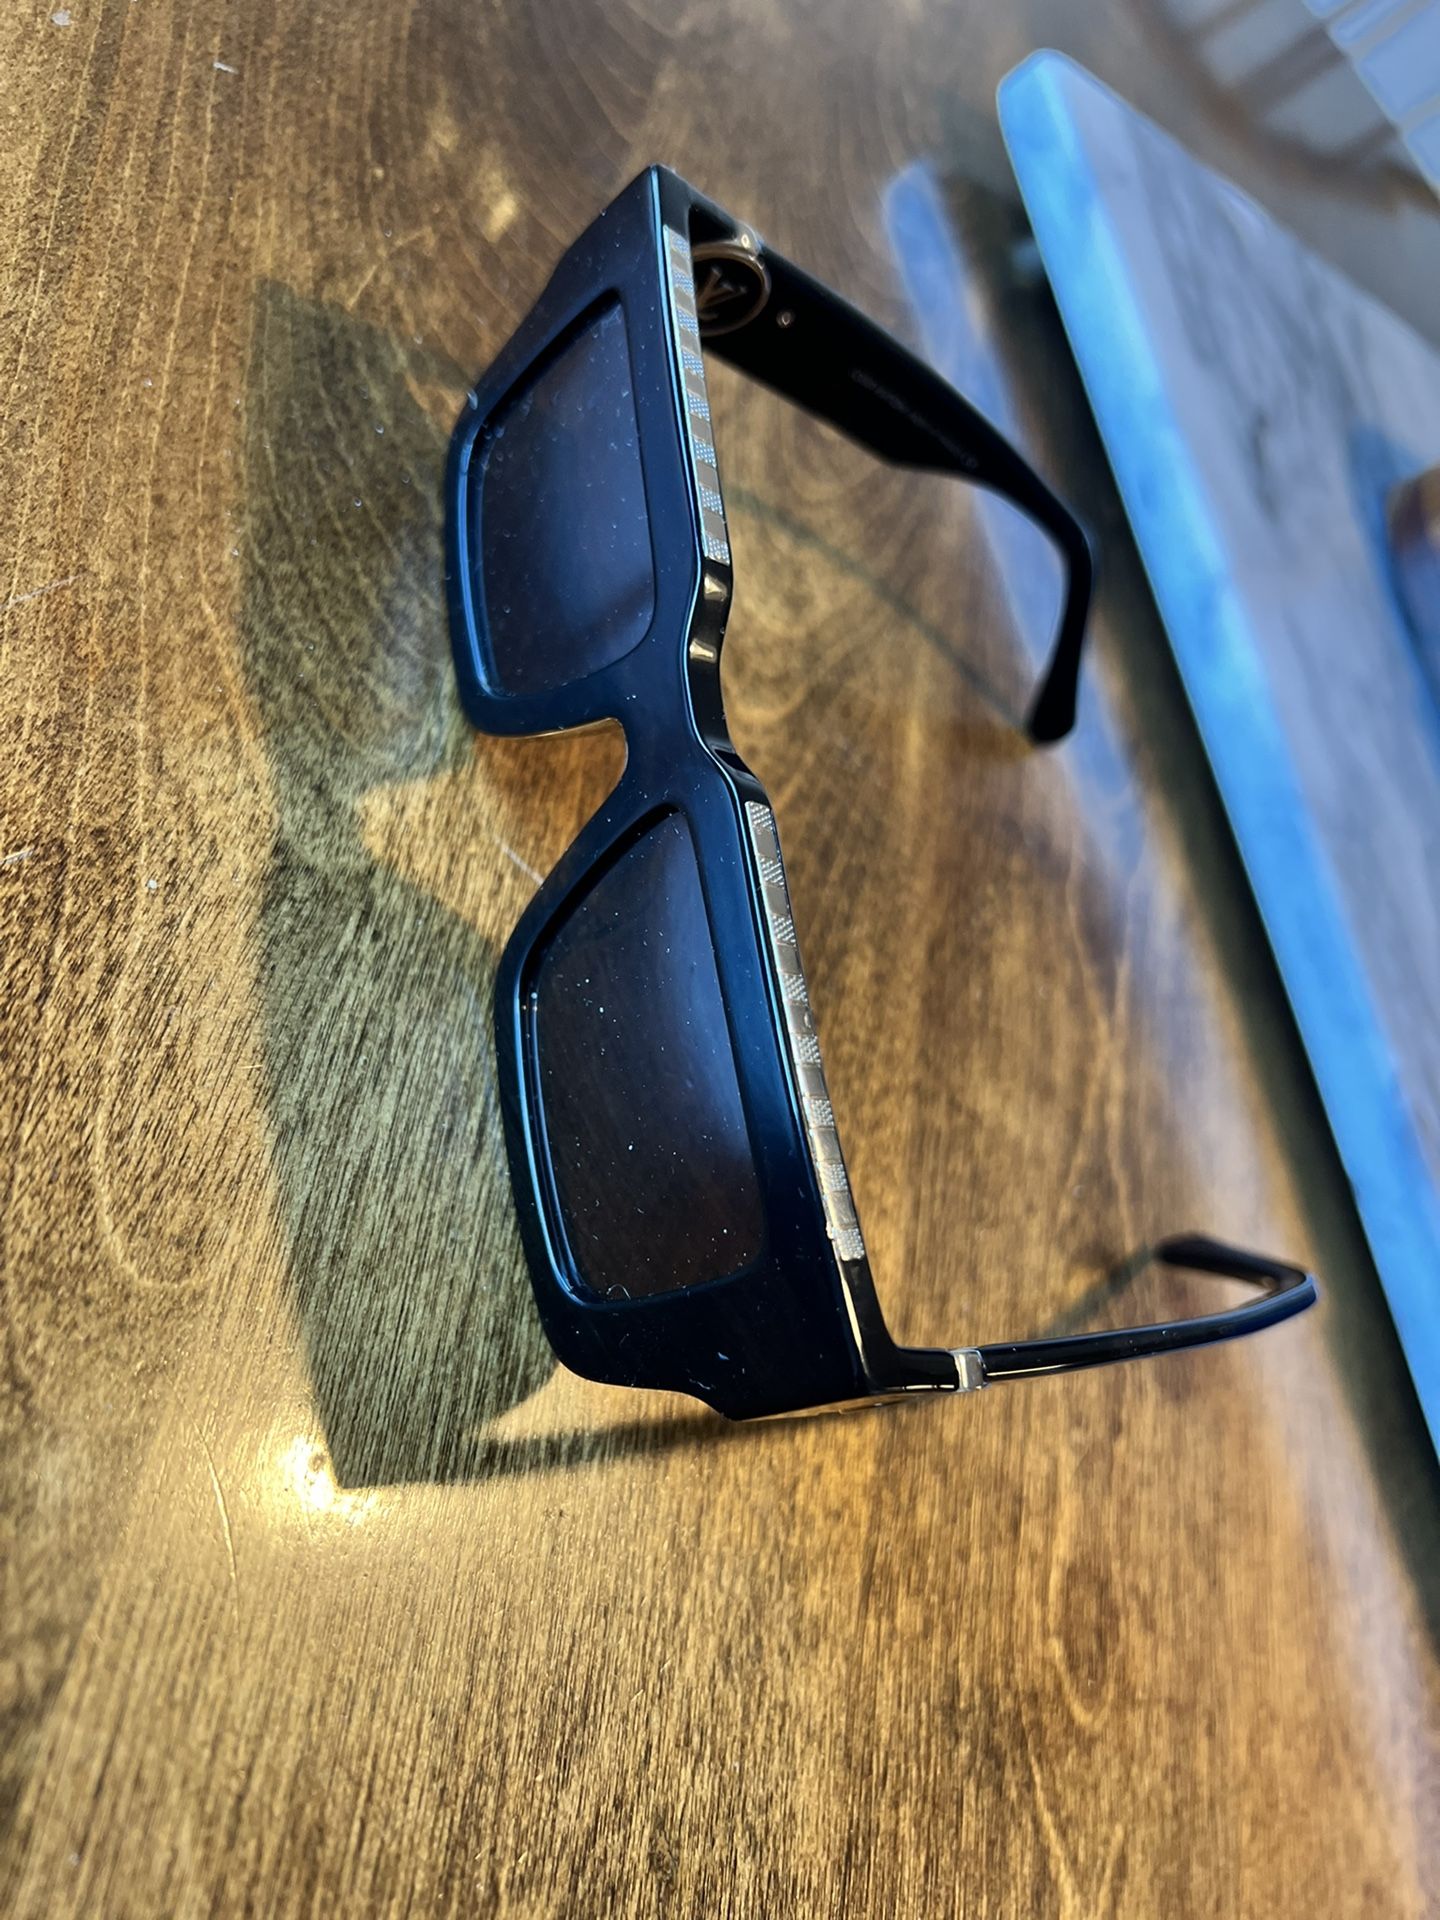 Louis Vuitton Sunglasses for Sale in Dresher, PA - OfferUp